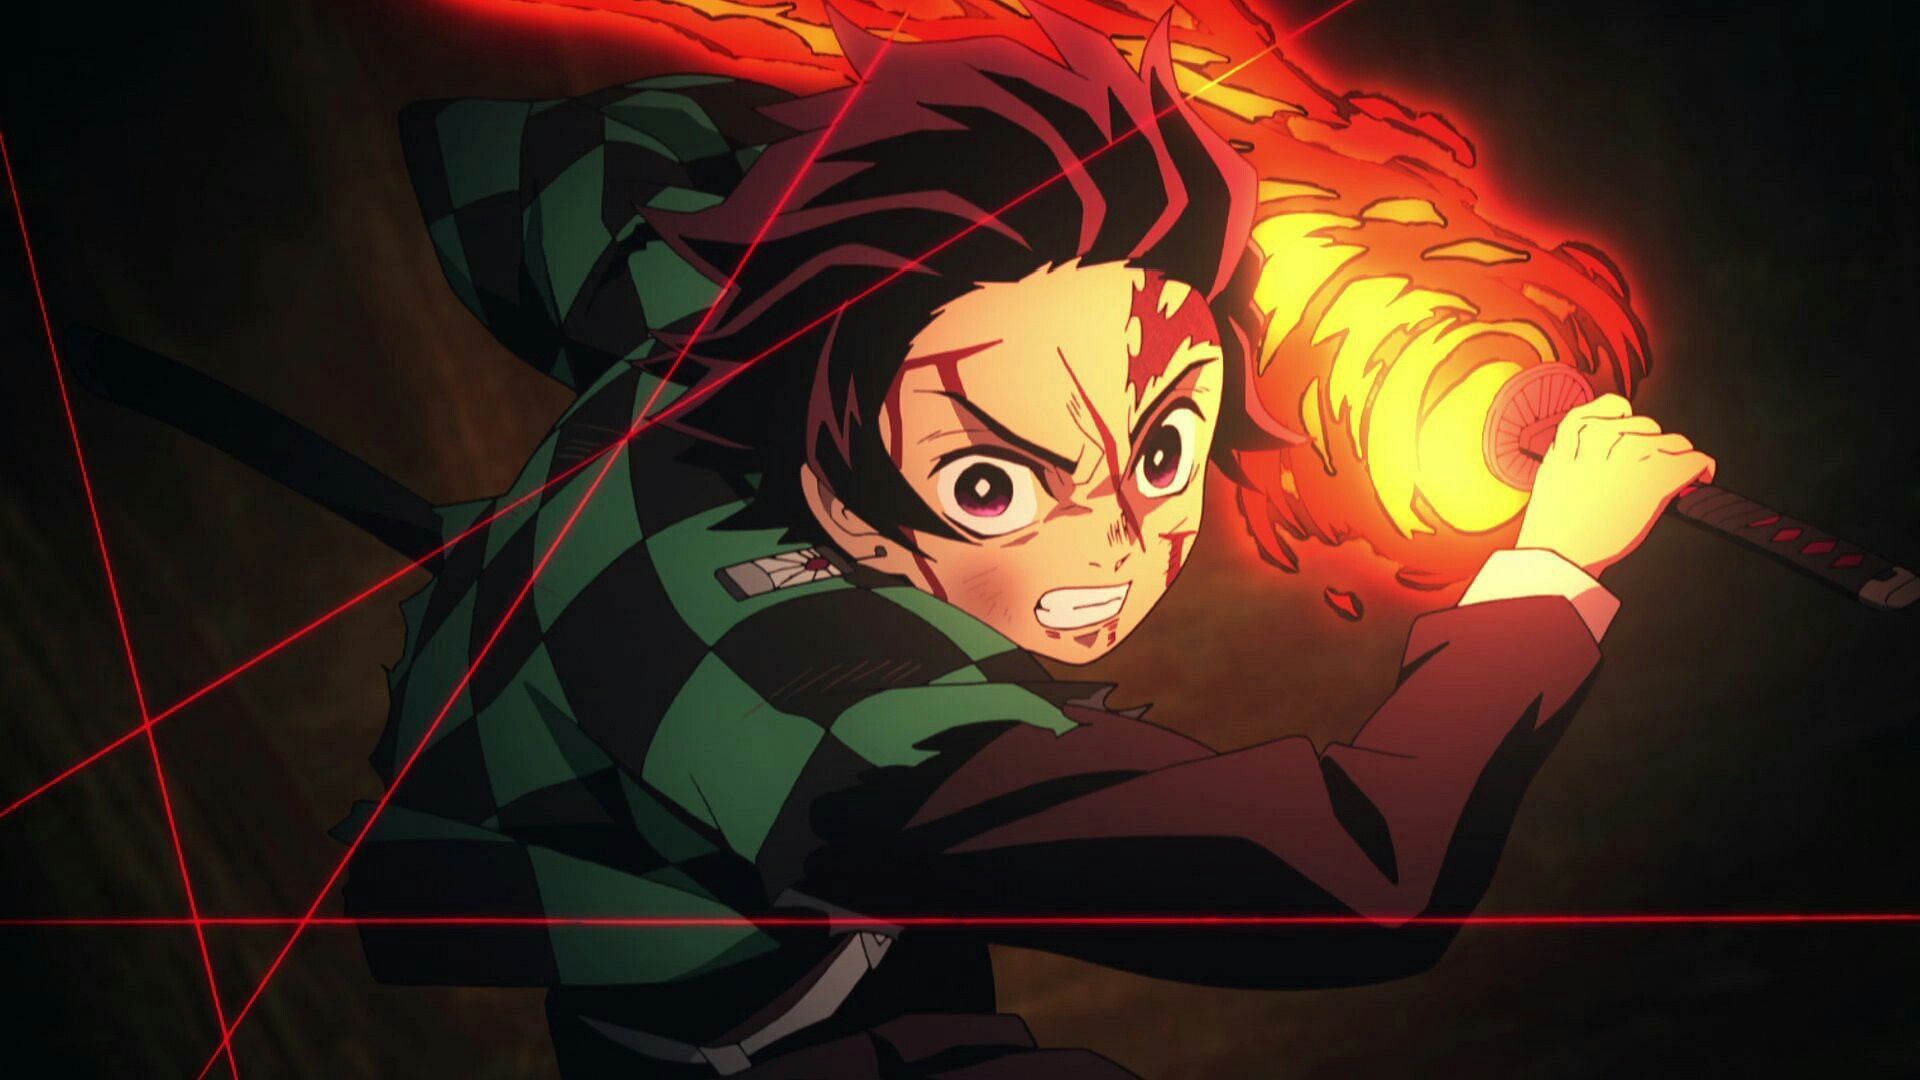 Netflix finally adds the entire Demon Slayer series for streaming